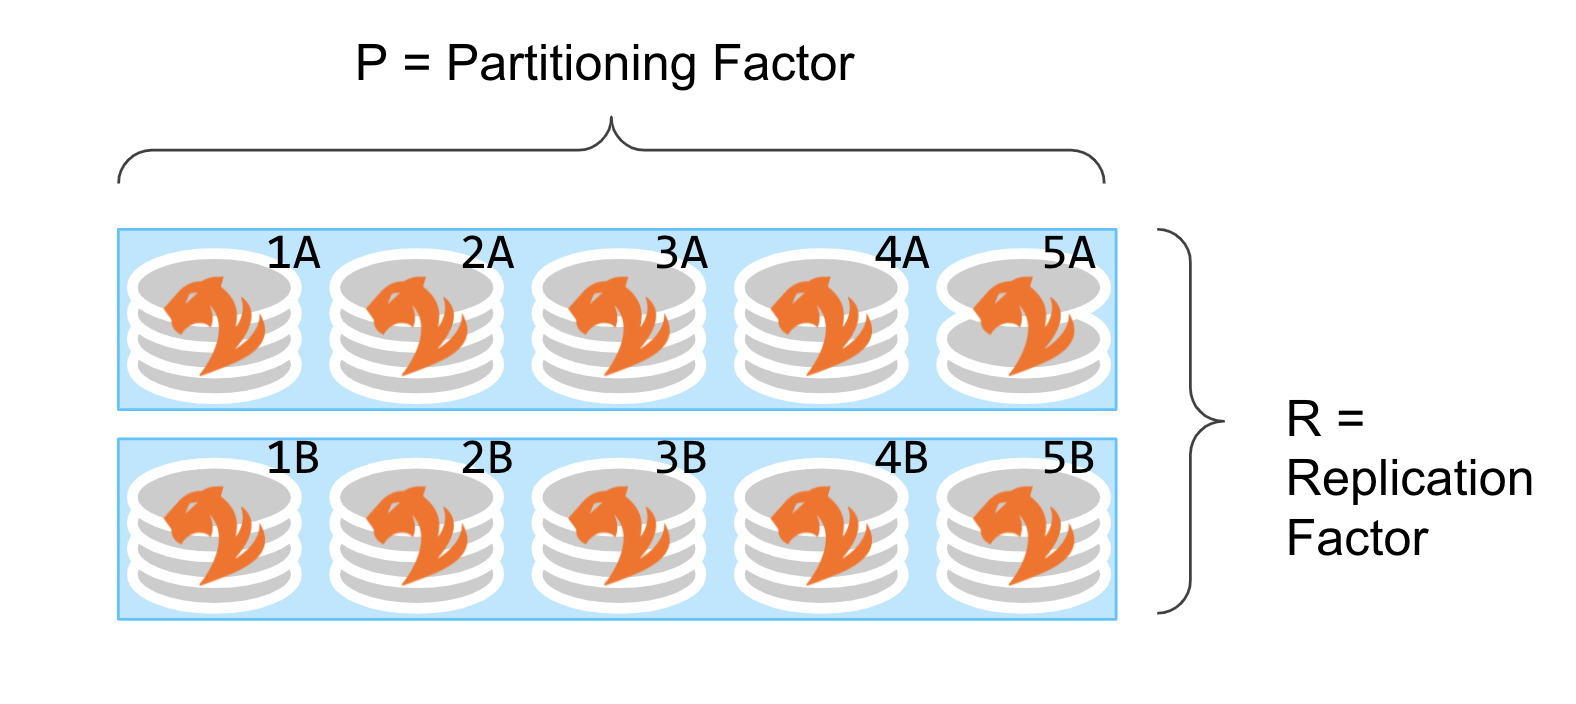 Replication factor and partitioning factor diagram